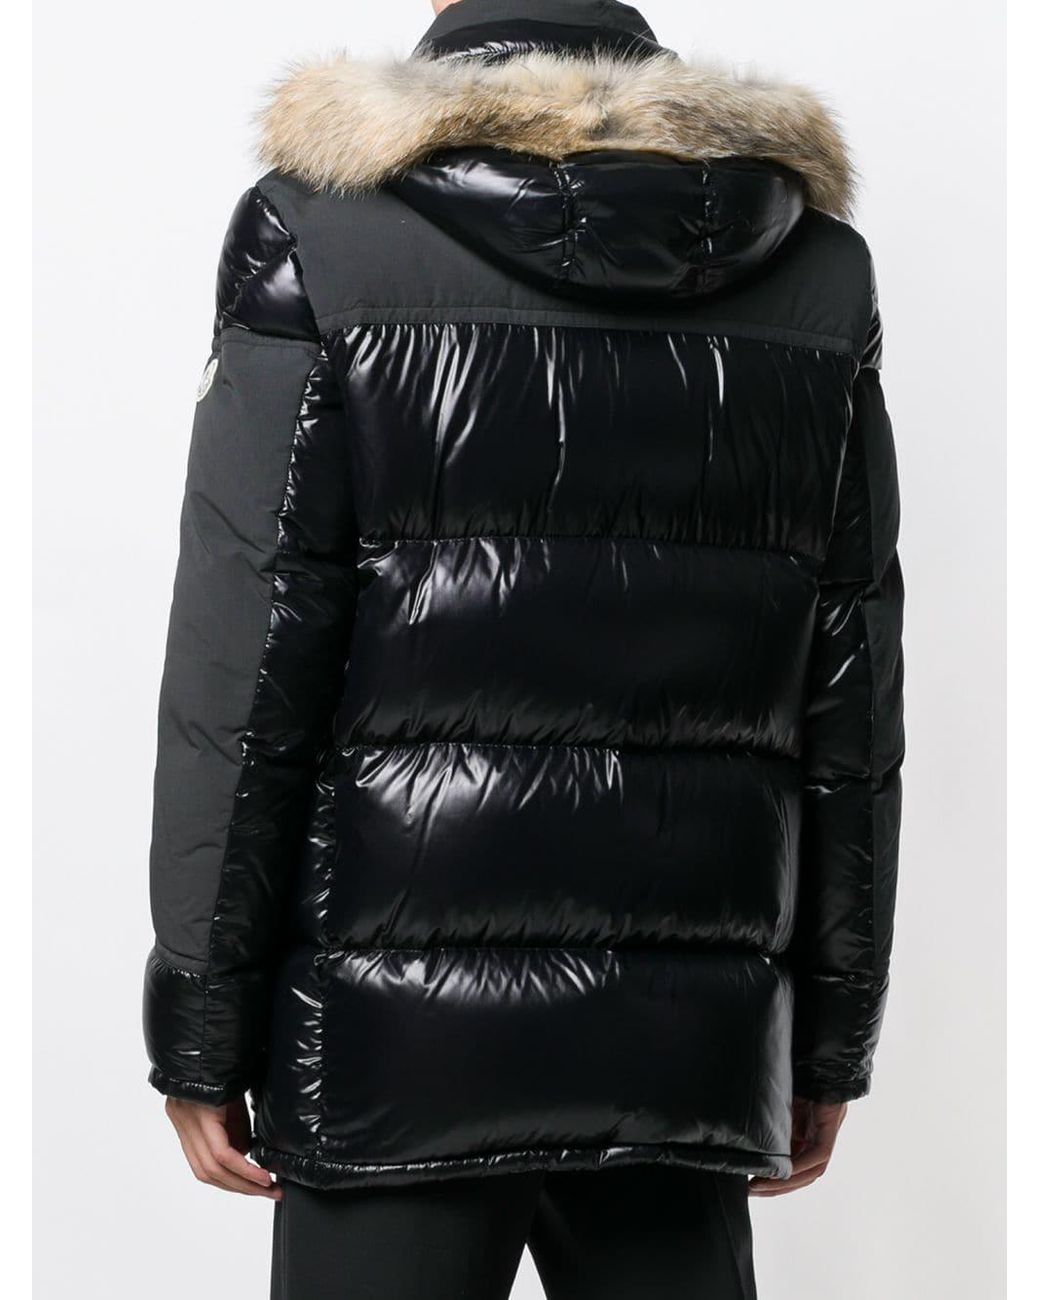 moncler frey Cheaper Than Retail Price> Buy Clothing, Accessories and  lifestyle products for women & men -